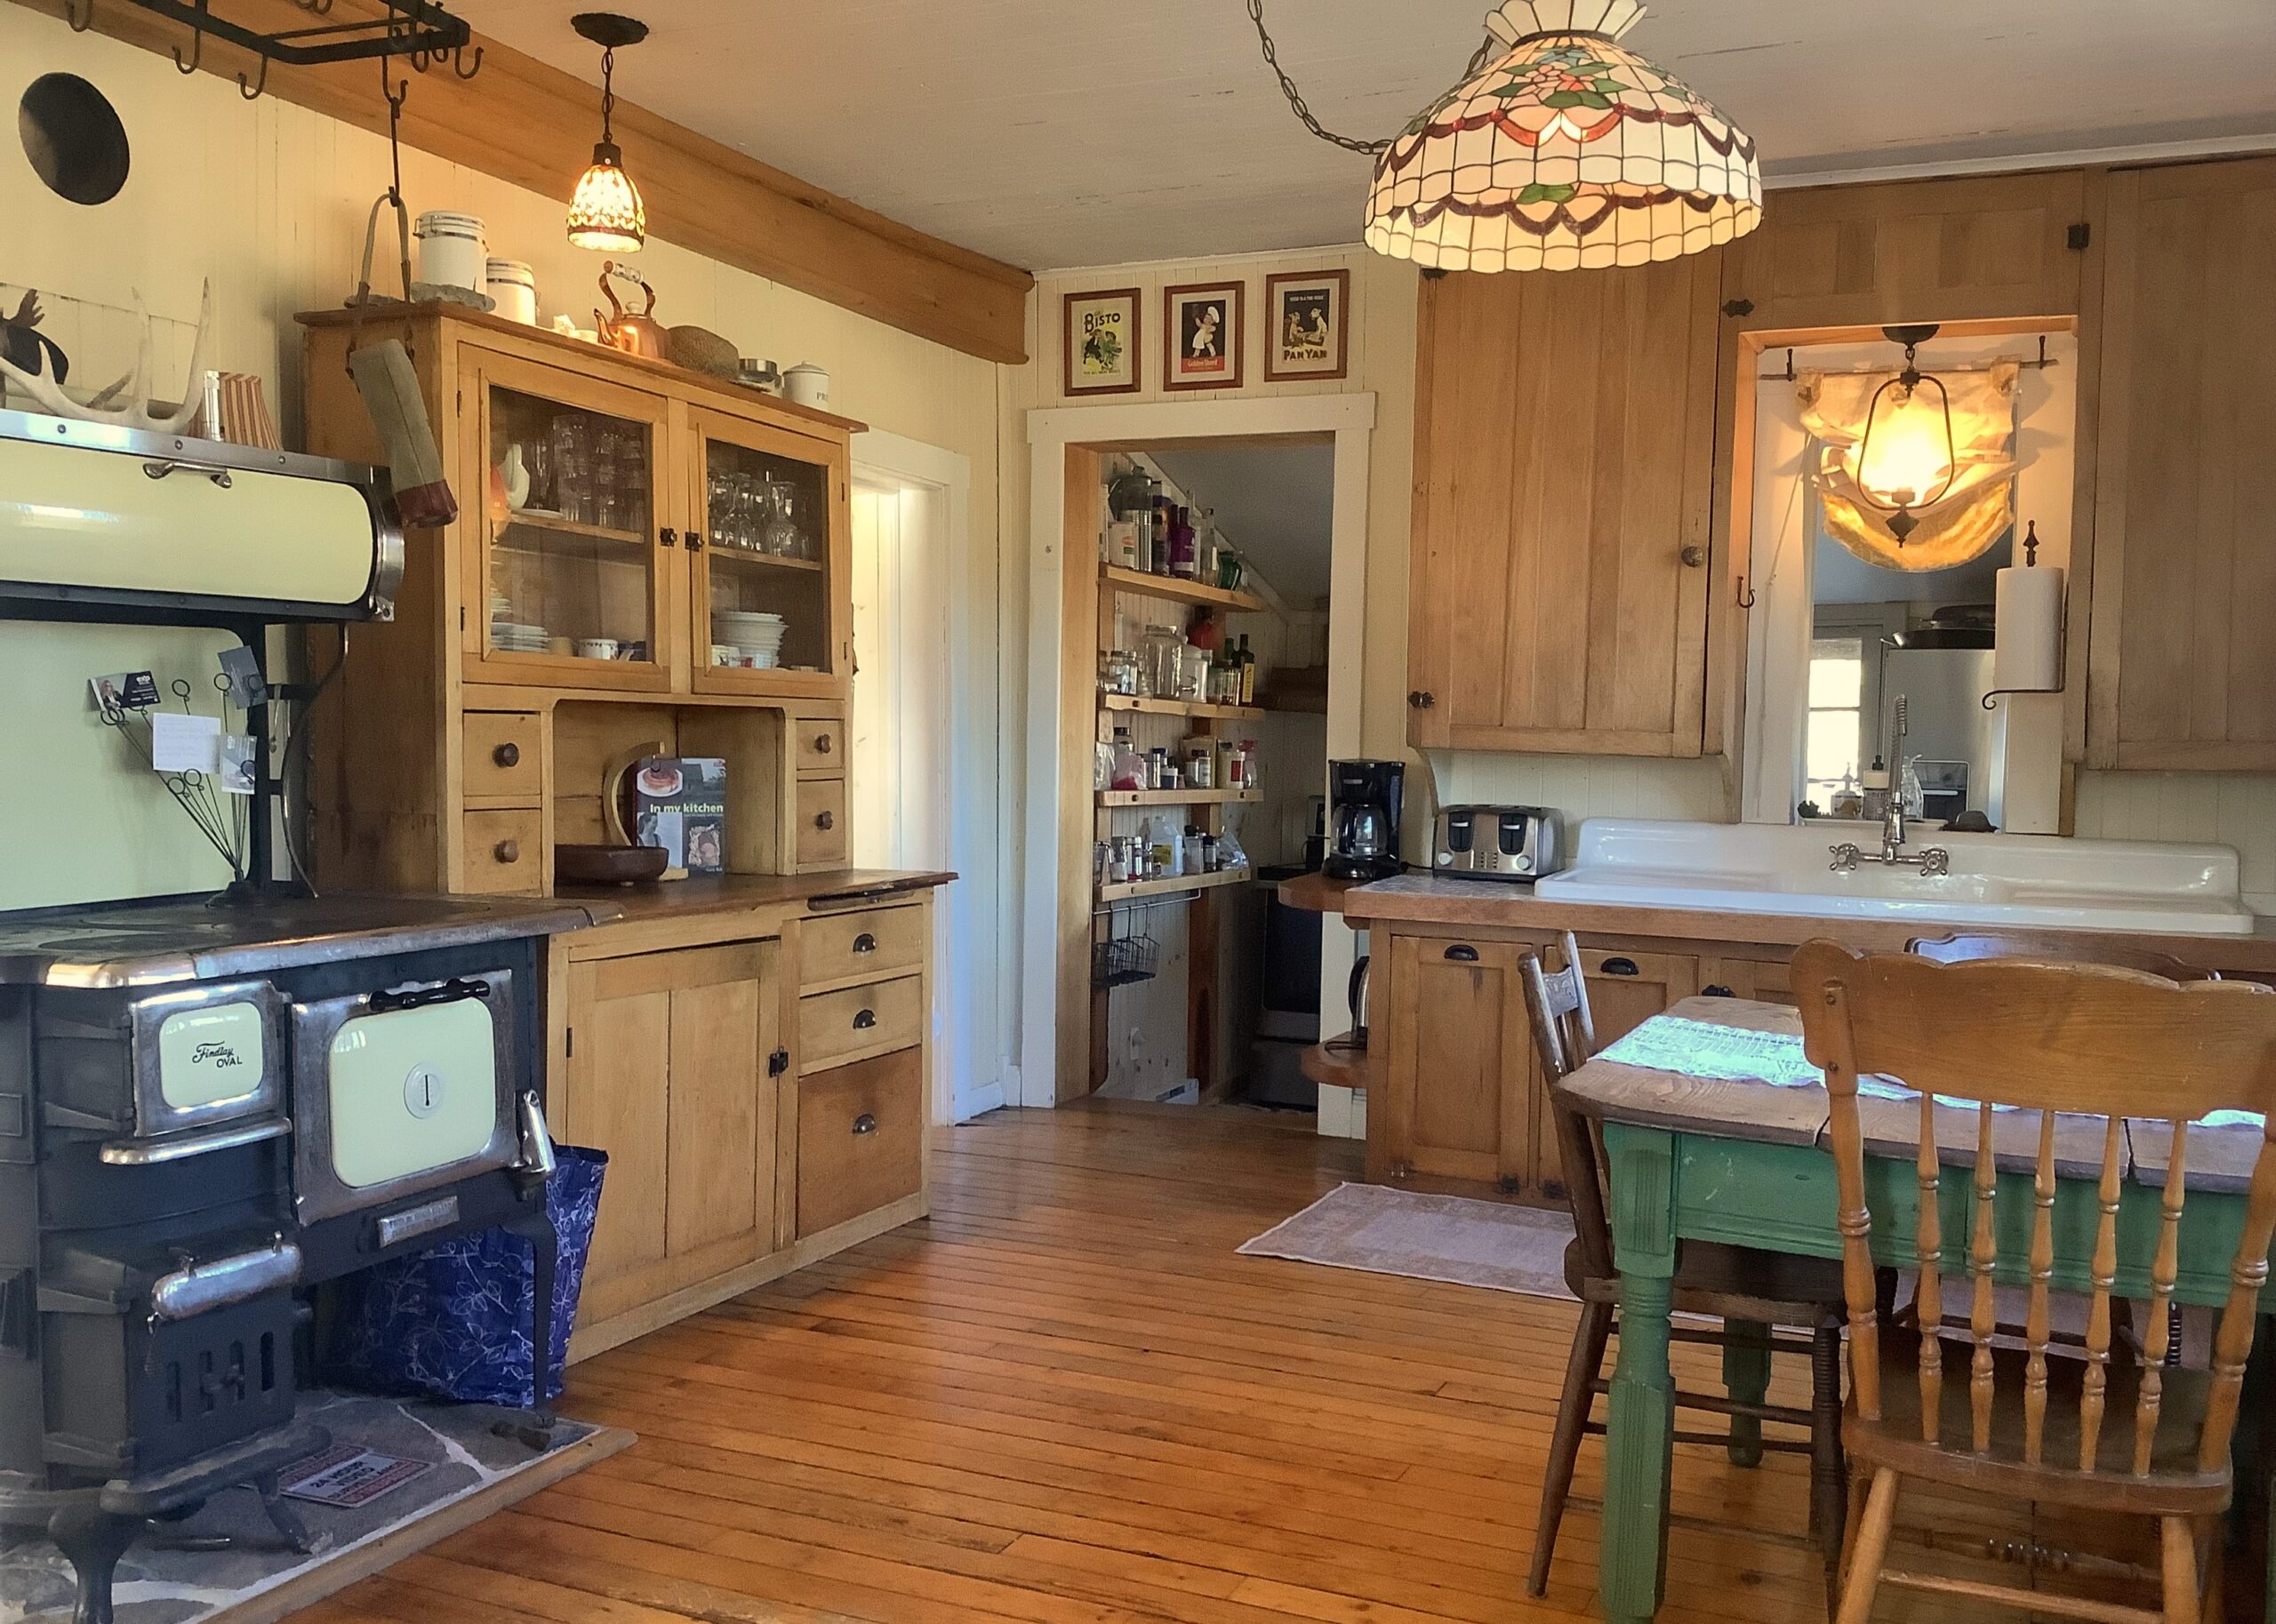 A kitchen with hardwood flooring, a small table and chairs, wooden cabinets, a vintage glass light fixture, and an old stove.